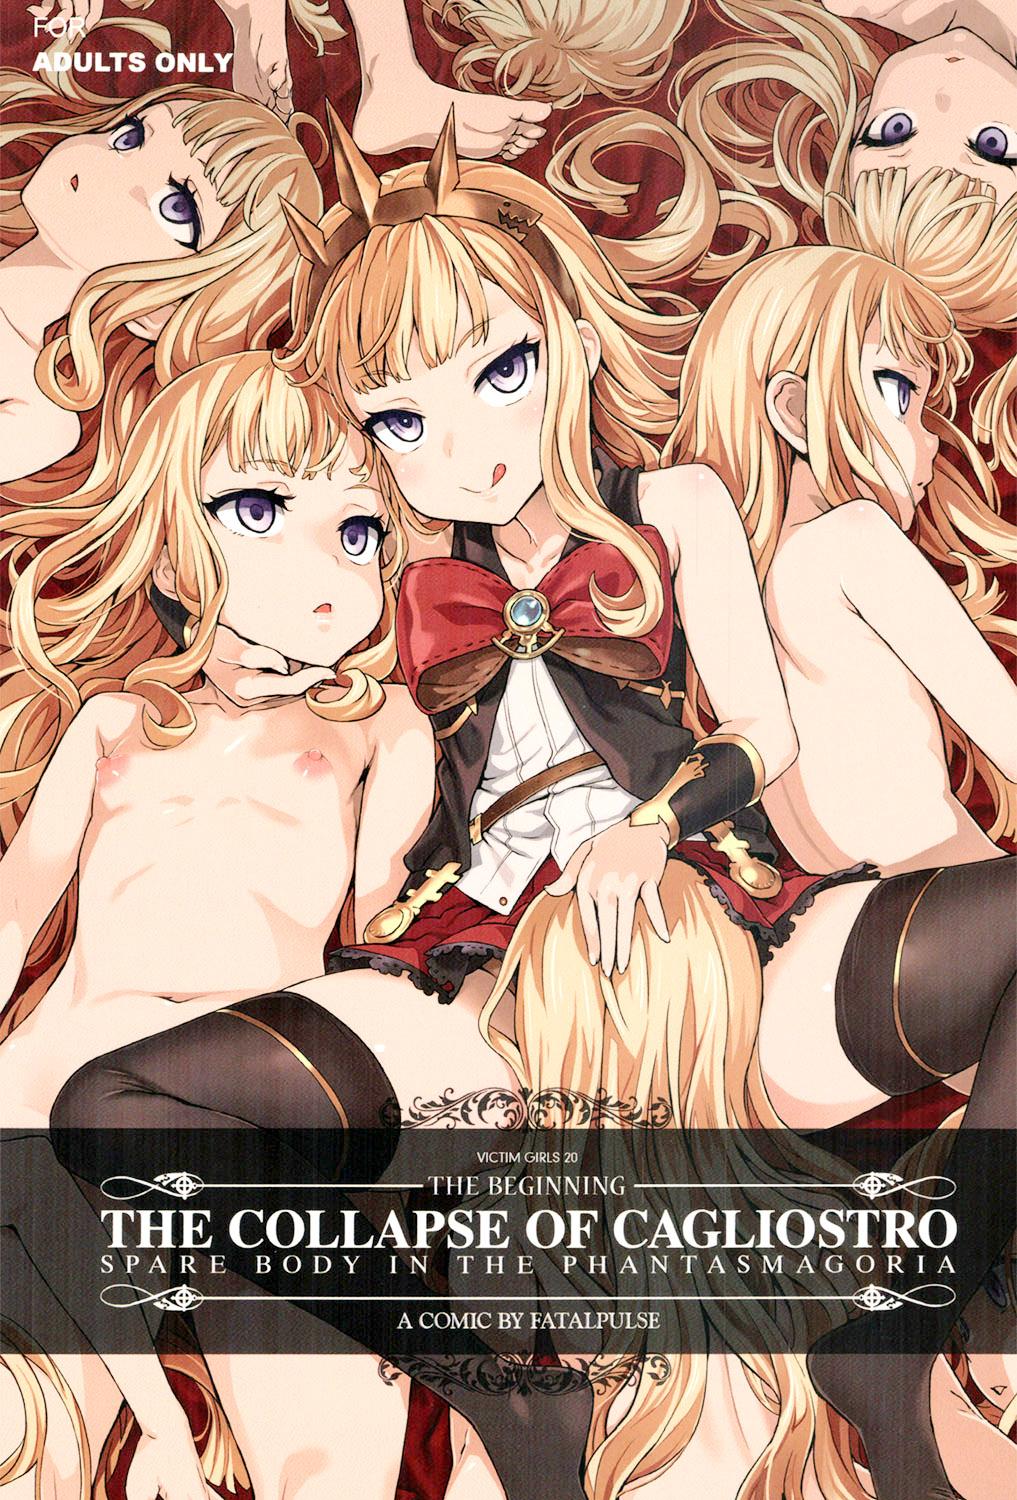 Babysitter Victim Girls 20 THE COLLAPSE OF CAGLIOSTRO - Granblue fantasy Horny - Page 2